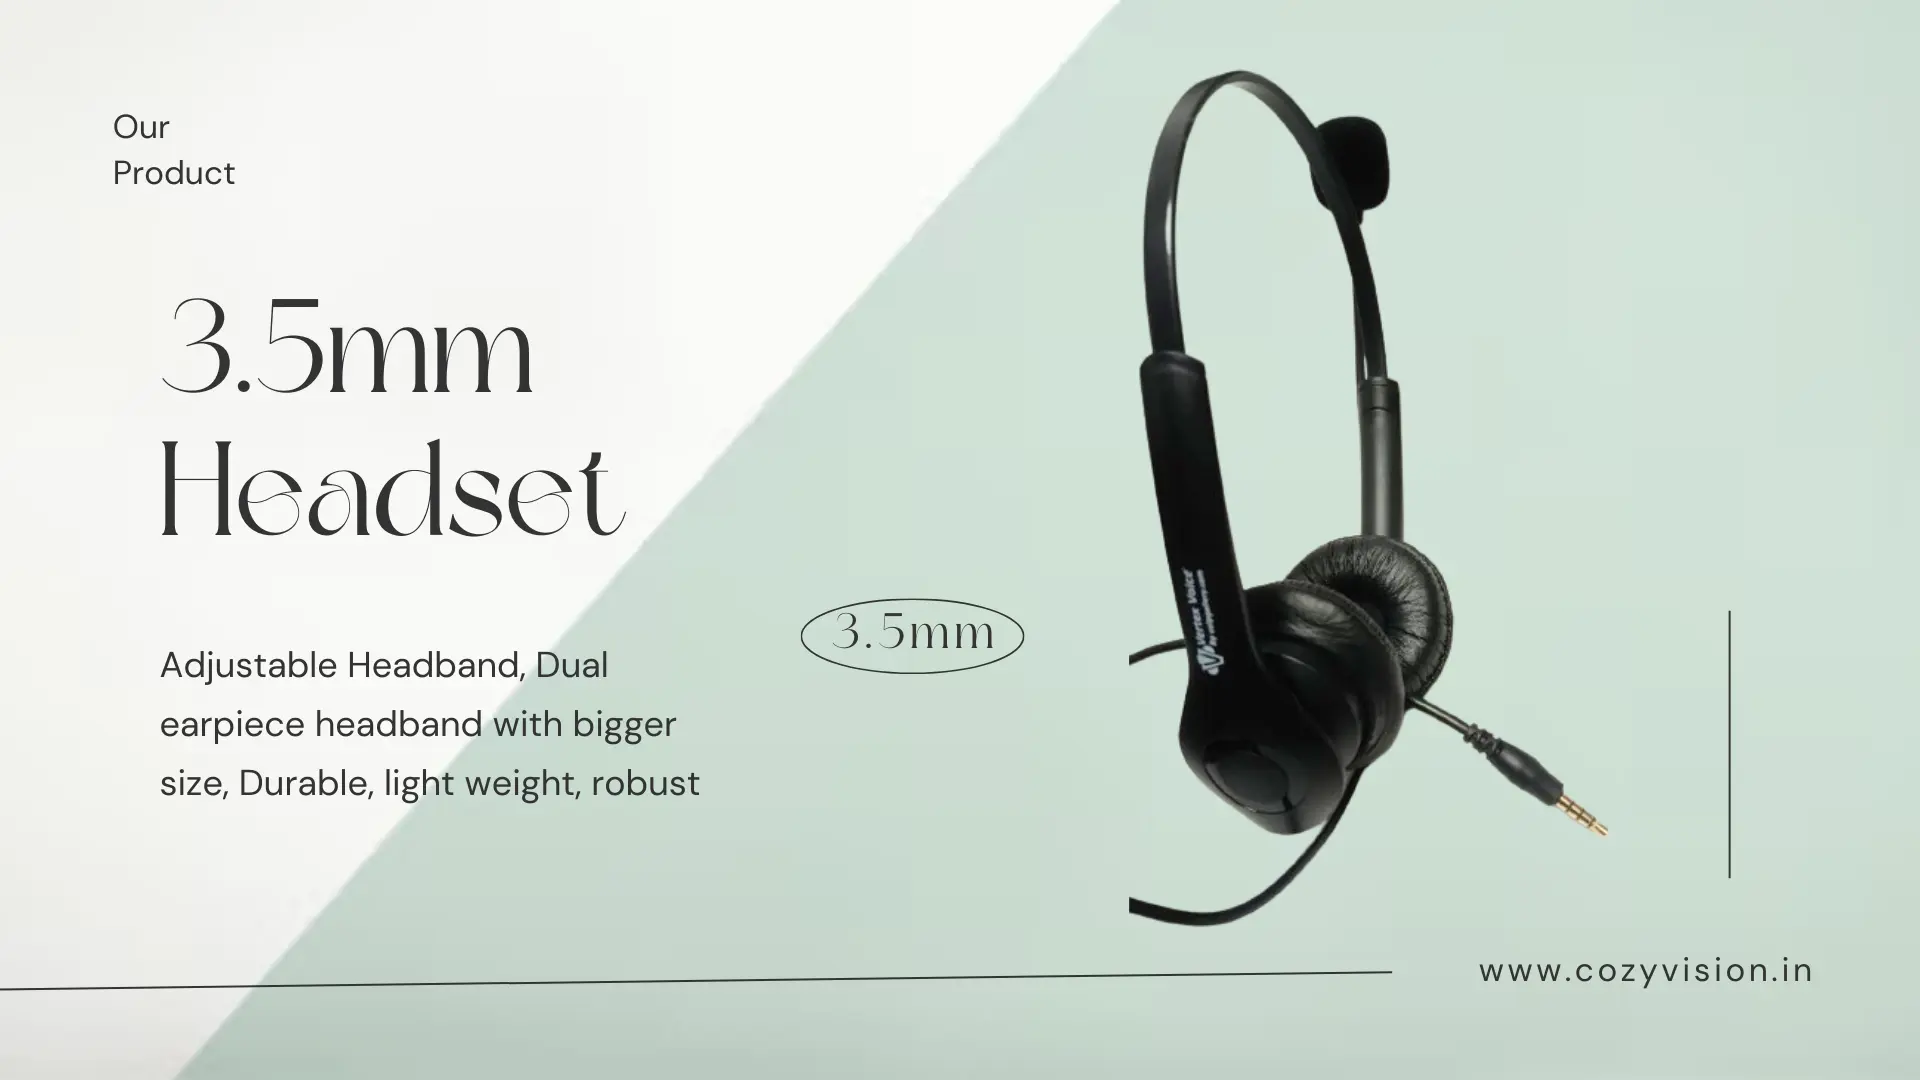 3.5mm headset product image 1